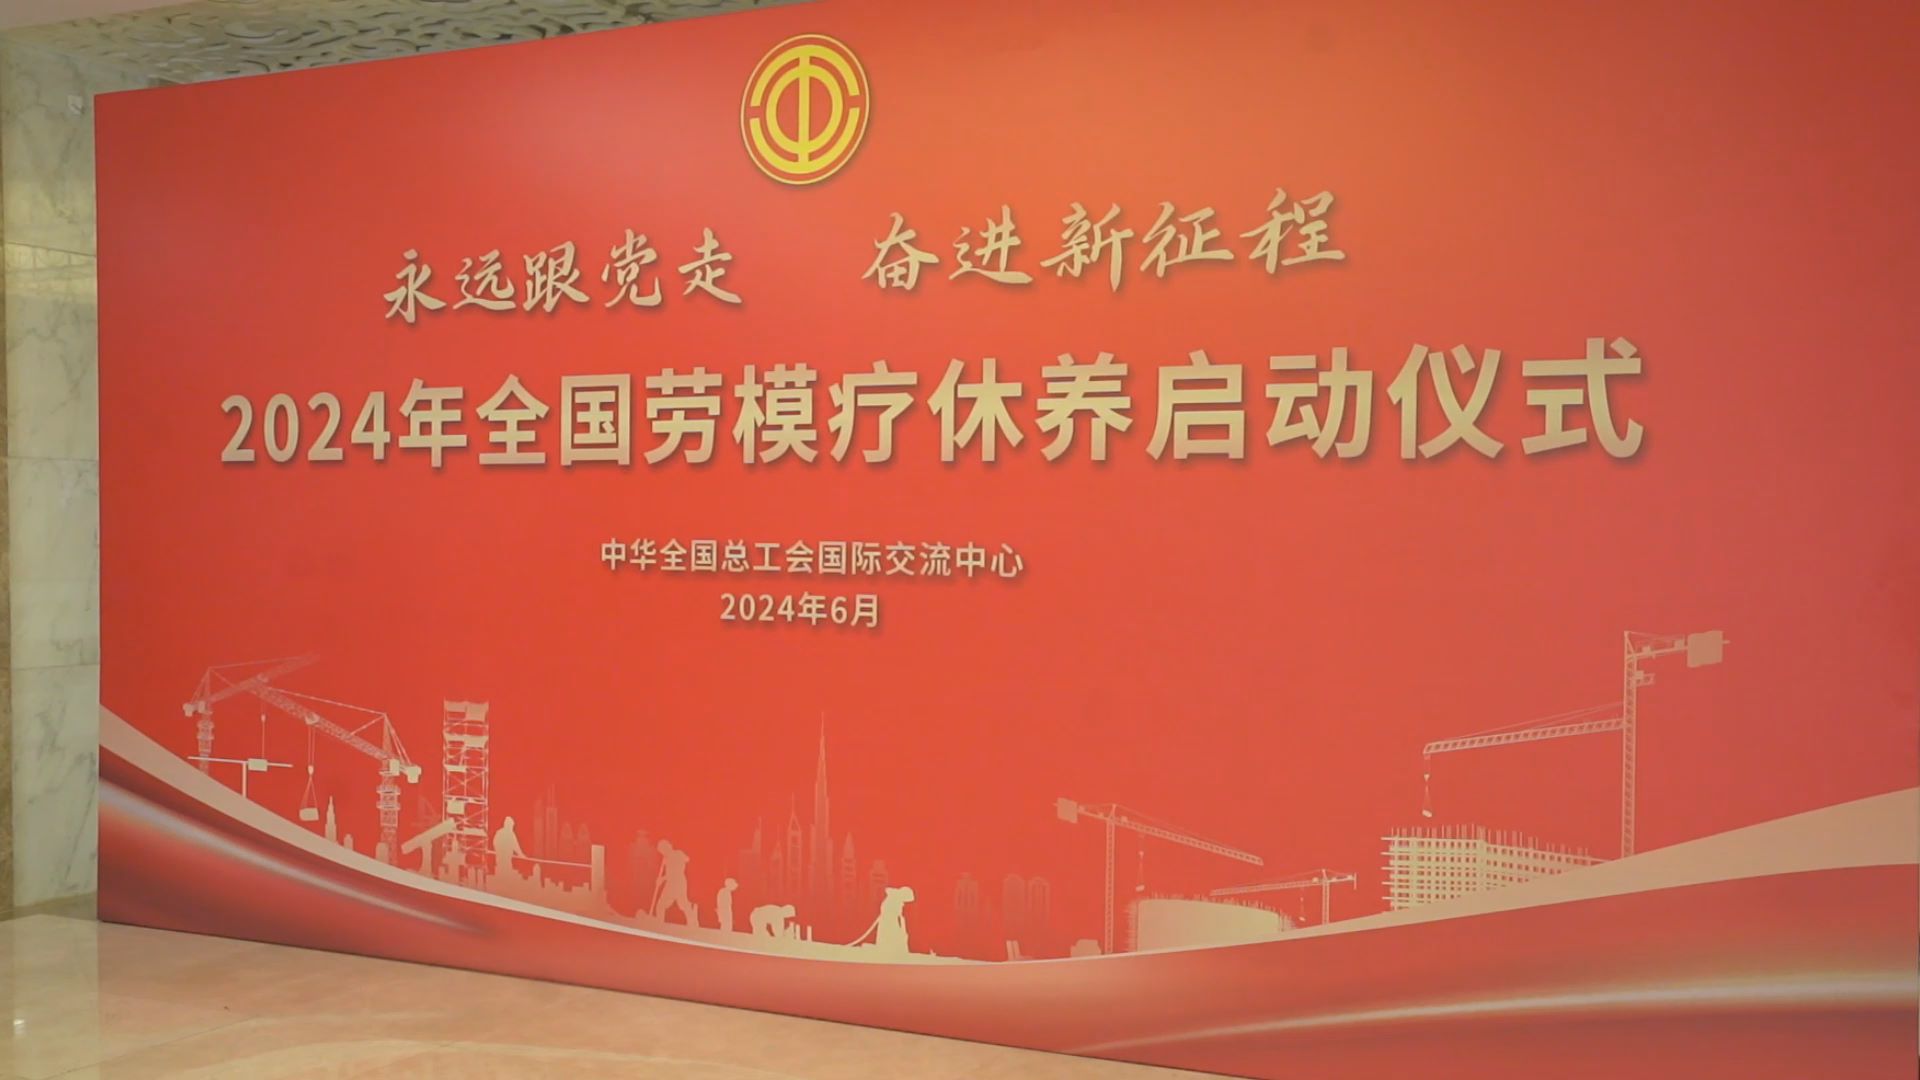  Work Video | 2024 National Model Worker Health Care Activity Launched in Beijing